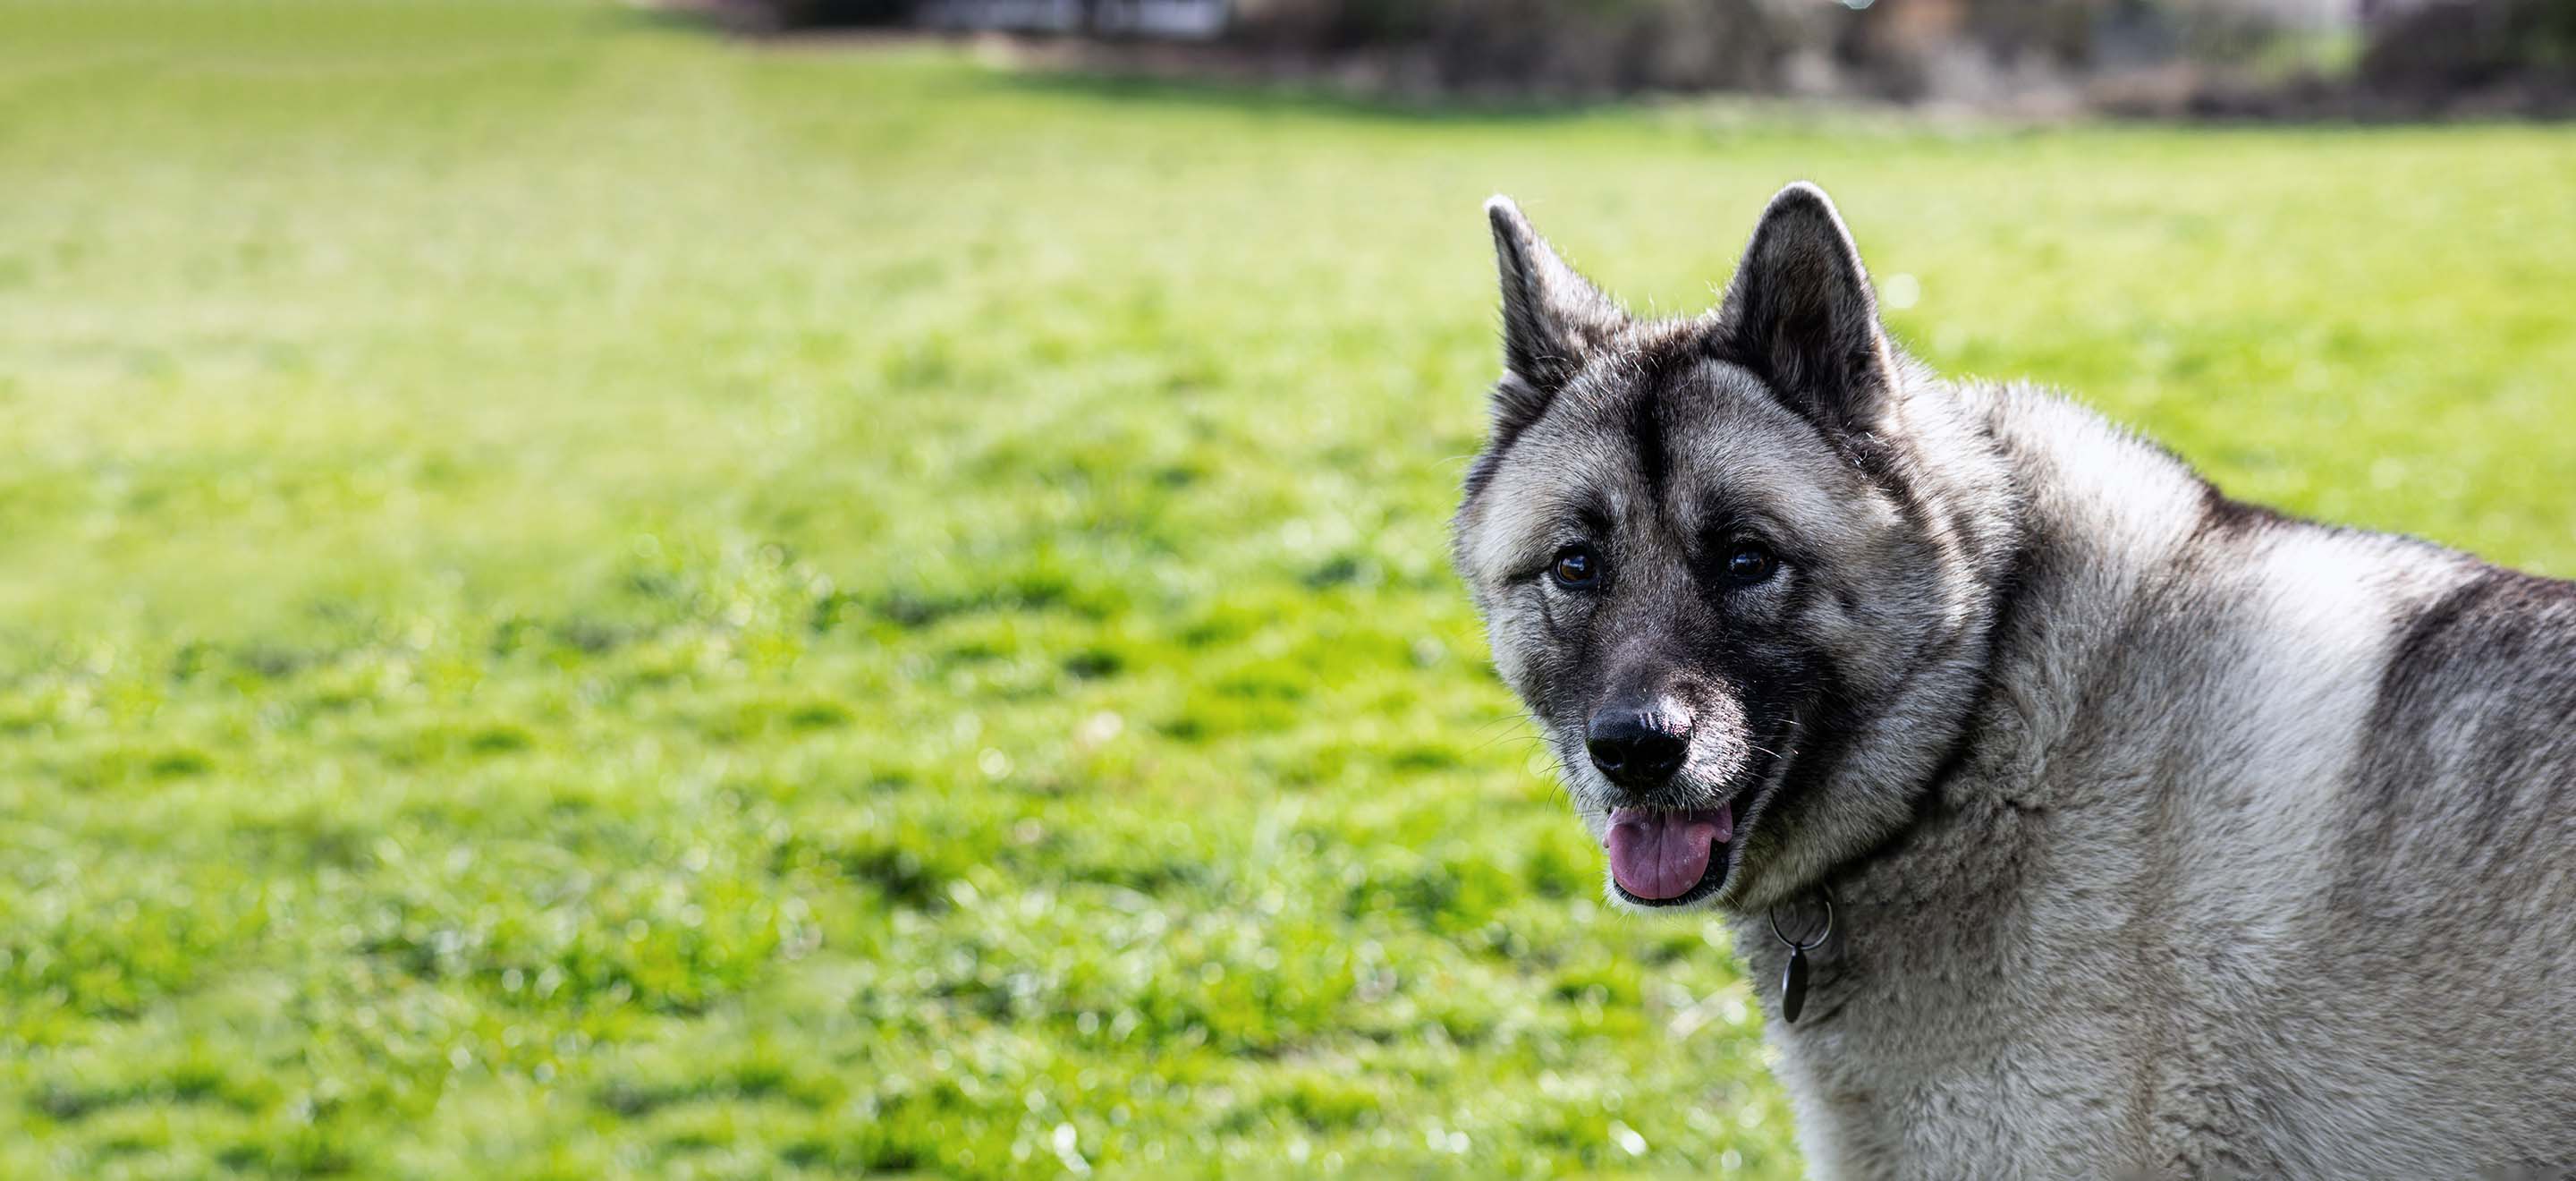 A Norwegian Elkhound standing in a grassy field image